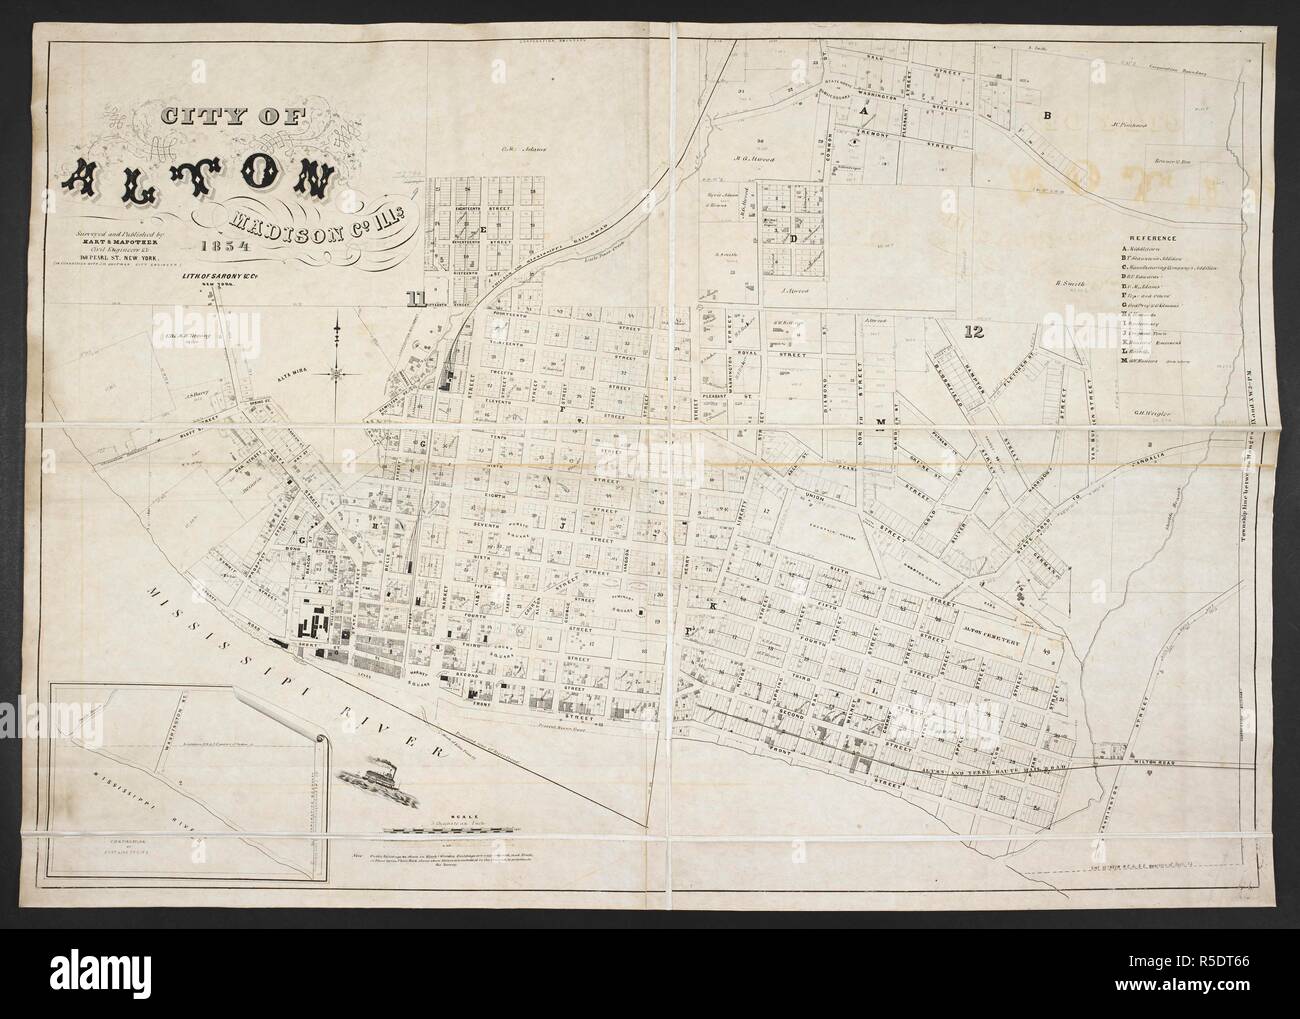 A map of Alton, Madison County, Illinois. City of Alton. Surveyed and published by Hart and Mapother, Civil Engineers ... Scale, 5 chains to an inch. New York, 1854. Source: Maps 72790.(9.). Language: English. Stock Photo